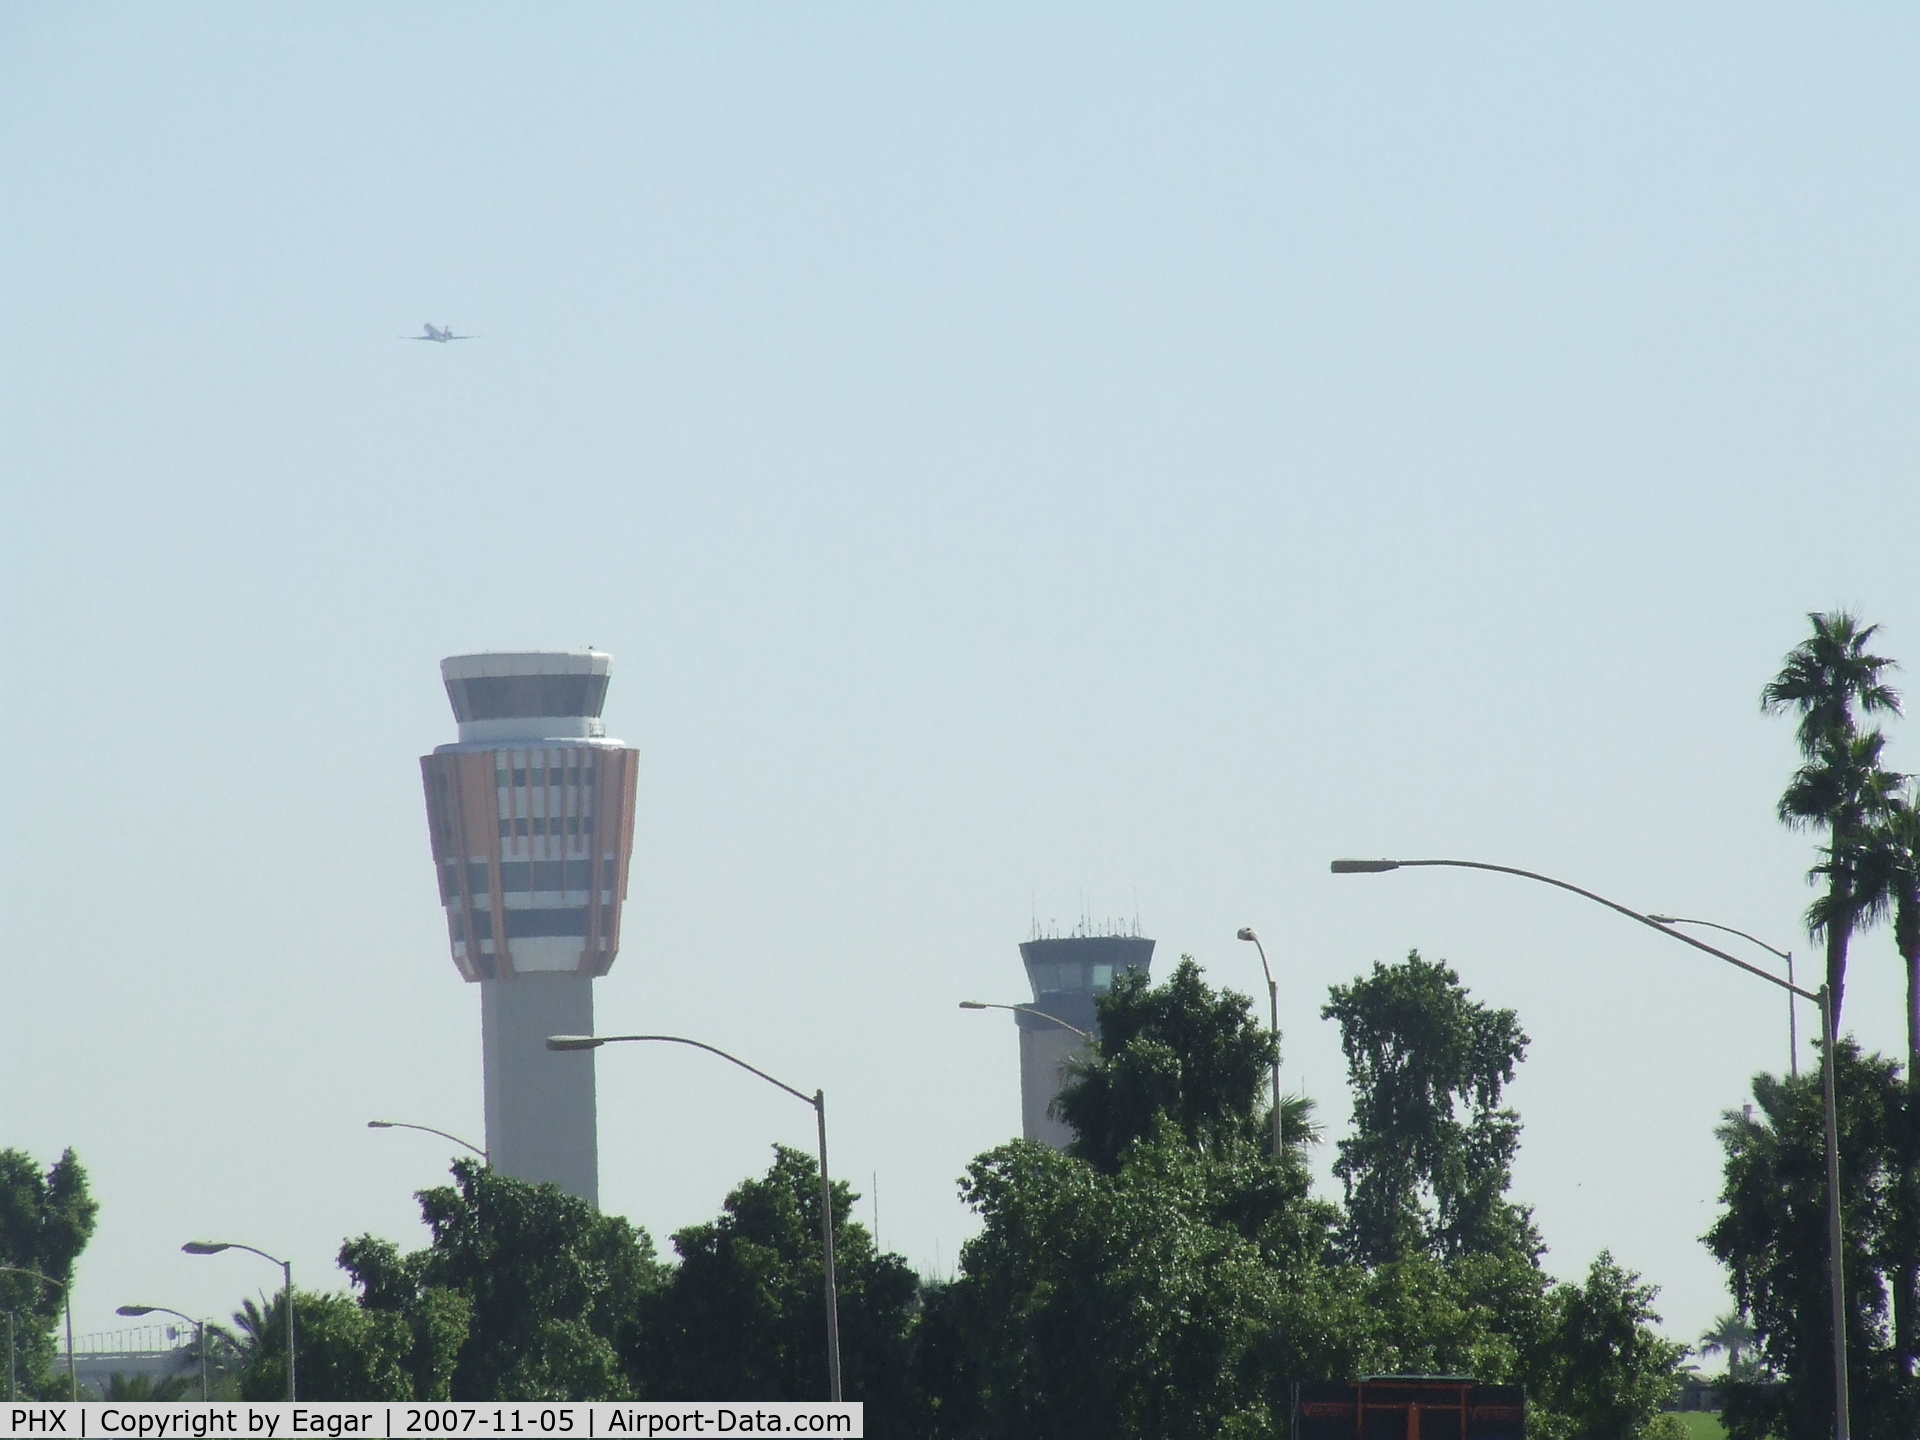 Phoenix Sky Harbor International Airport (PHX) - Before the old tower was taken down